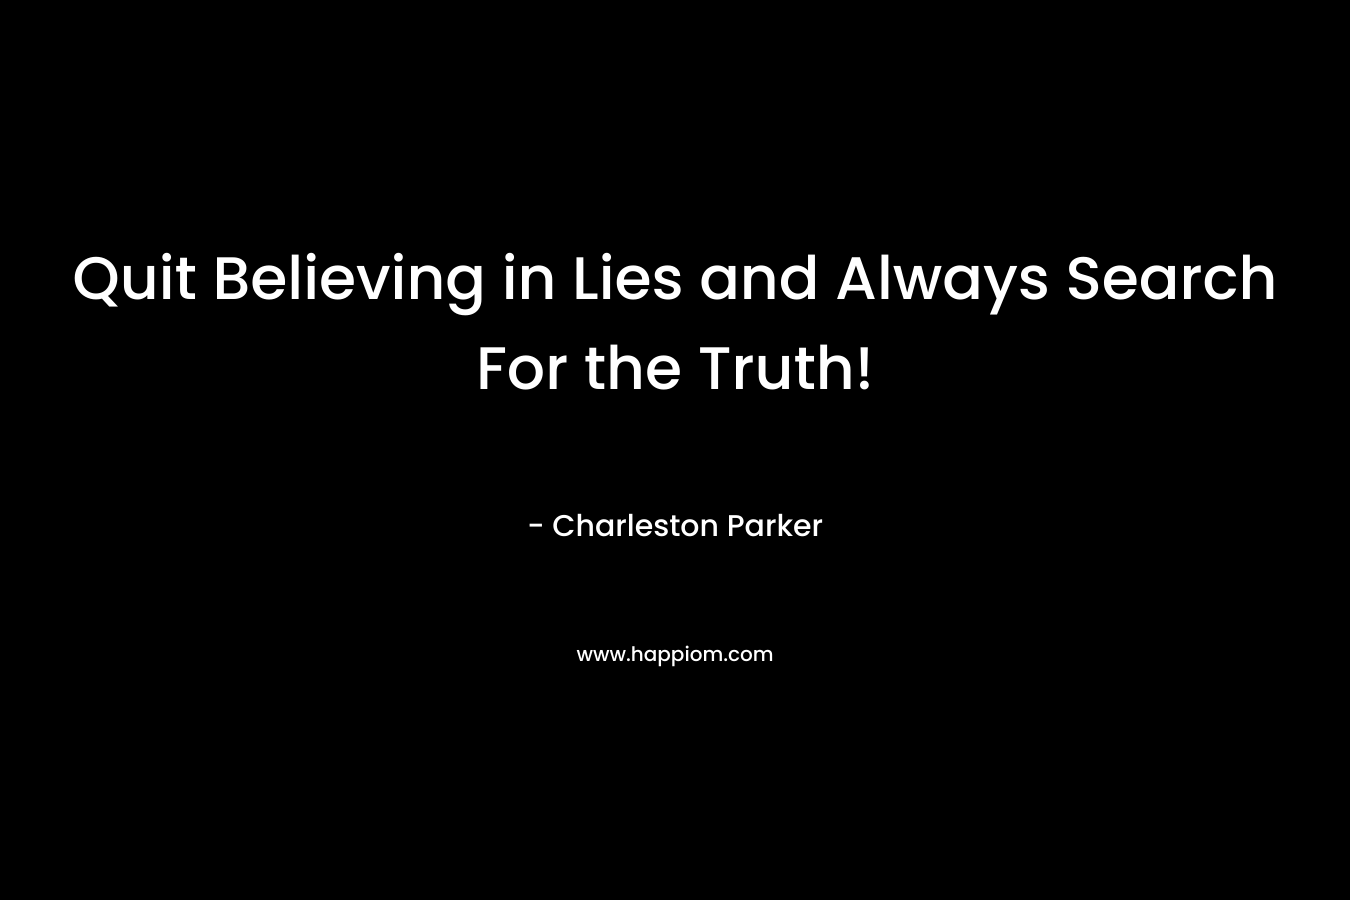 Quit Believing in Lies and Always Search For the Truth!